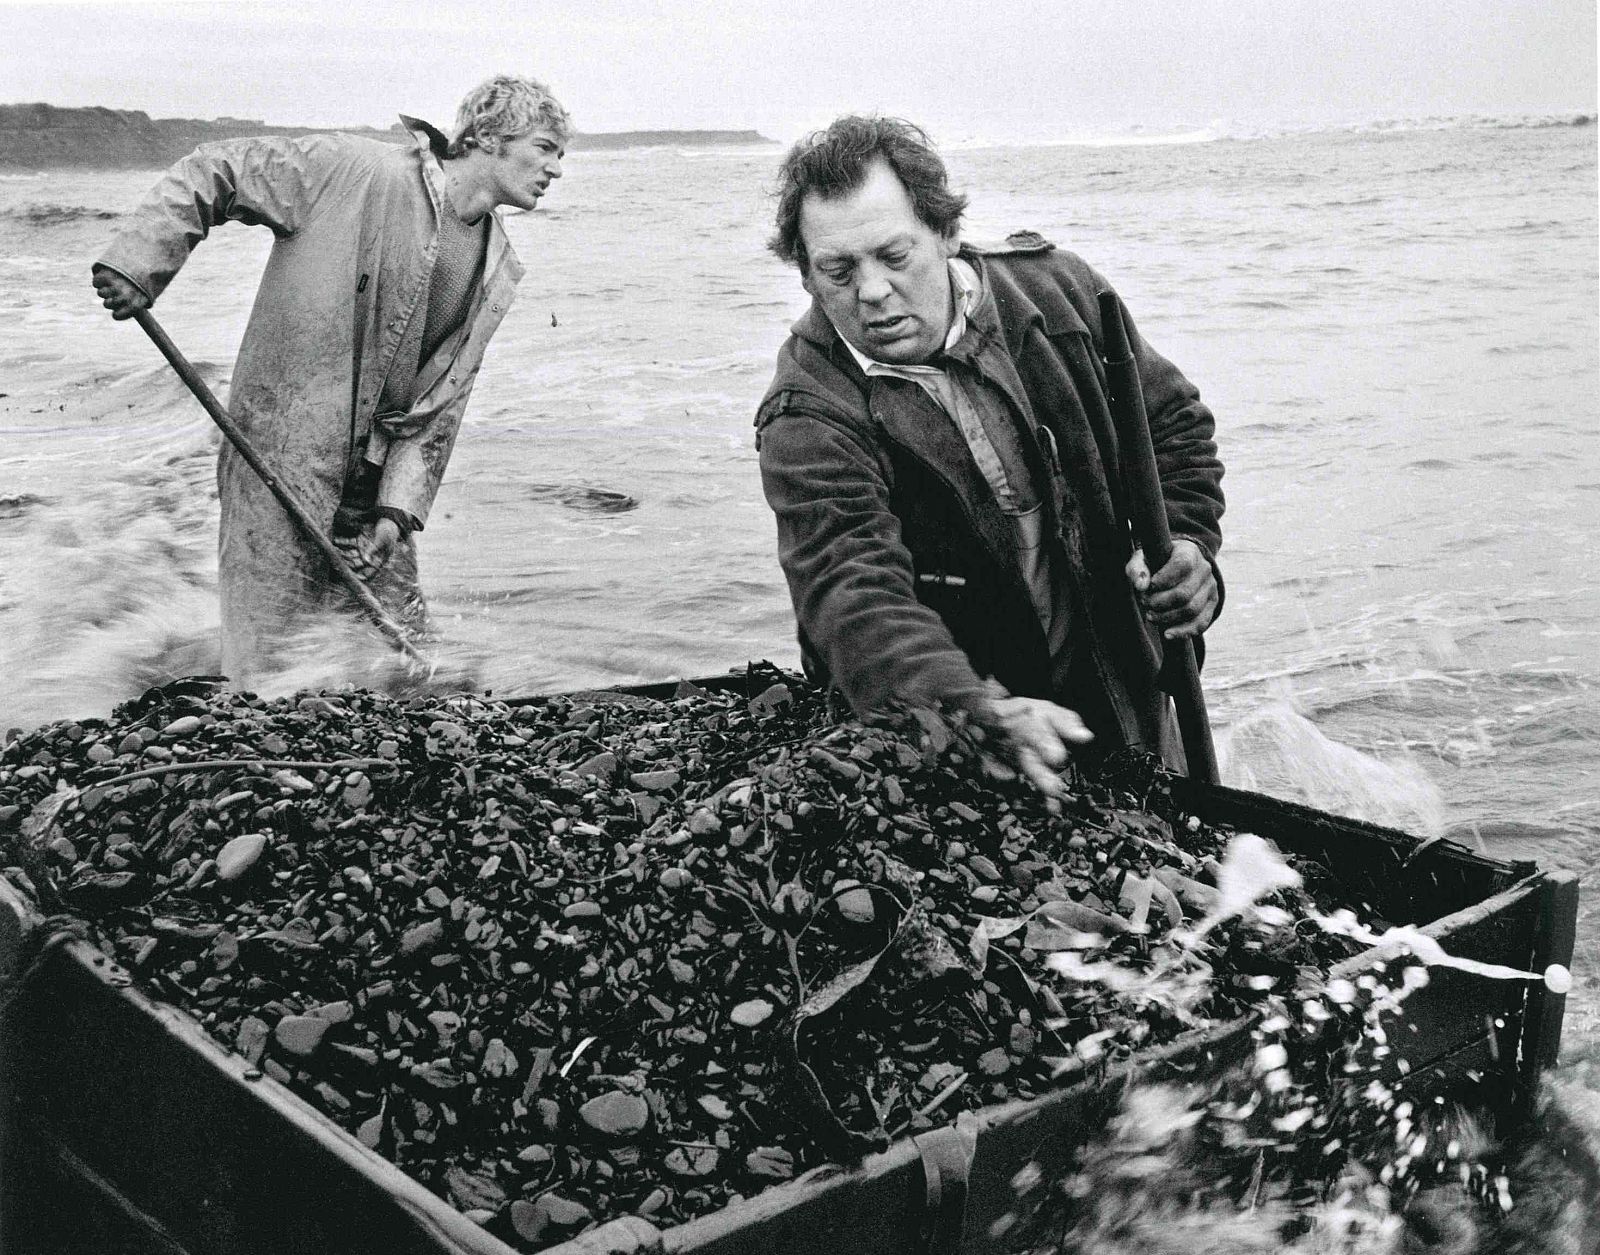 Brian Laidler and a Unidentifies Man Netting Seacoal, 1983/2010